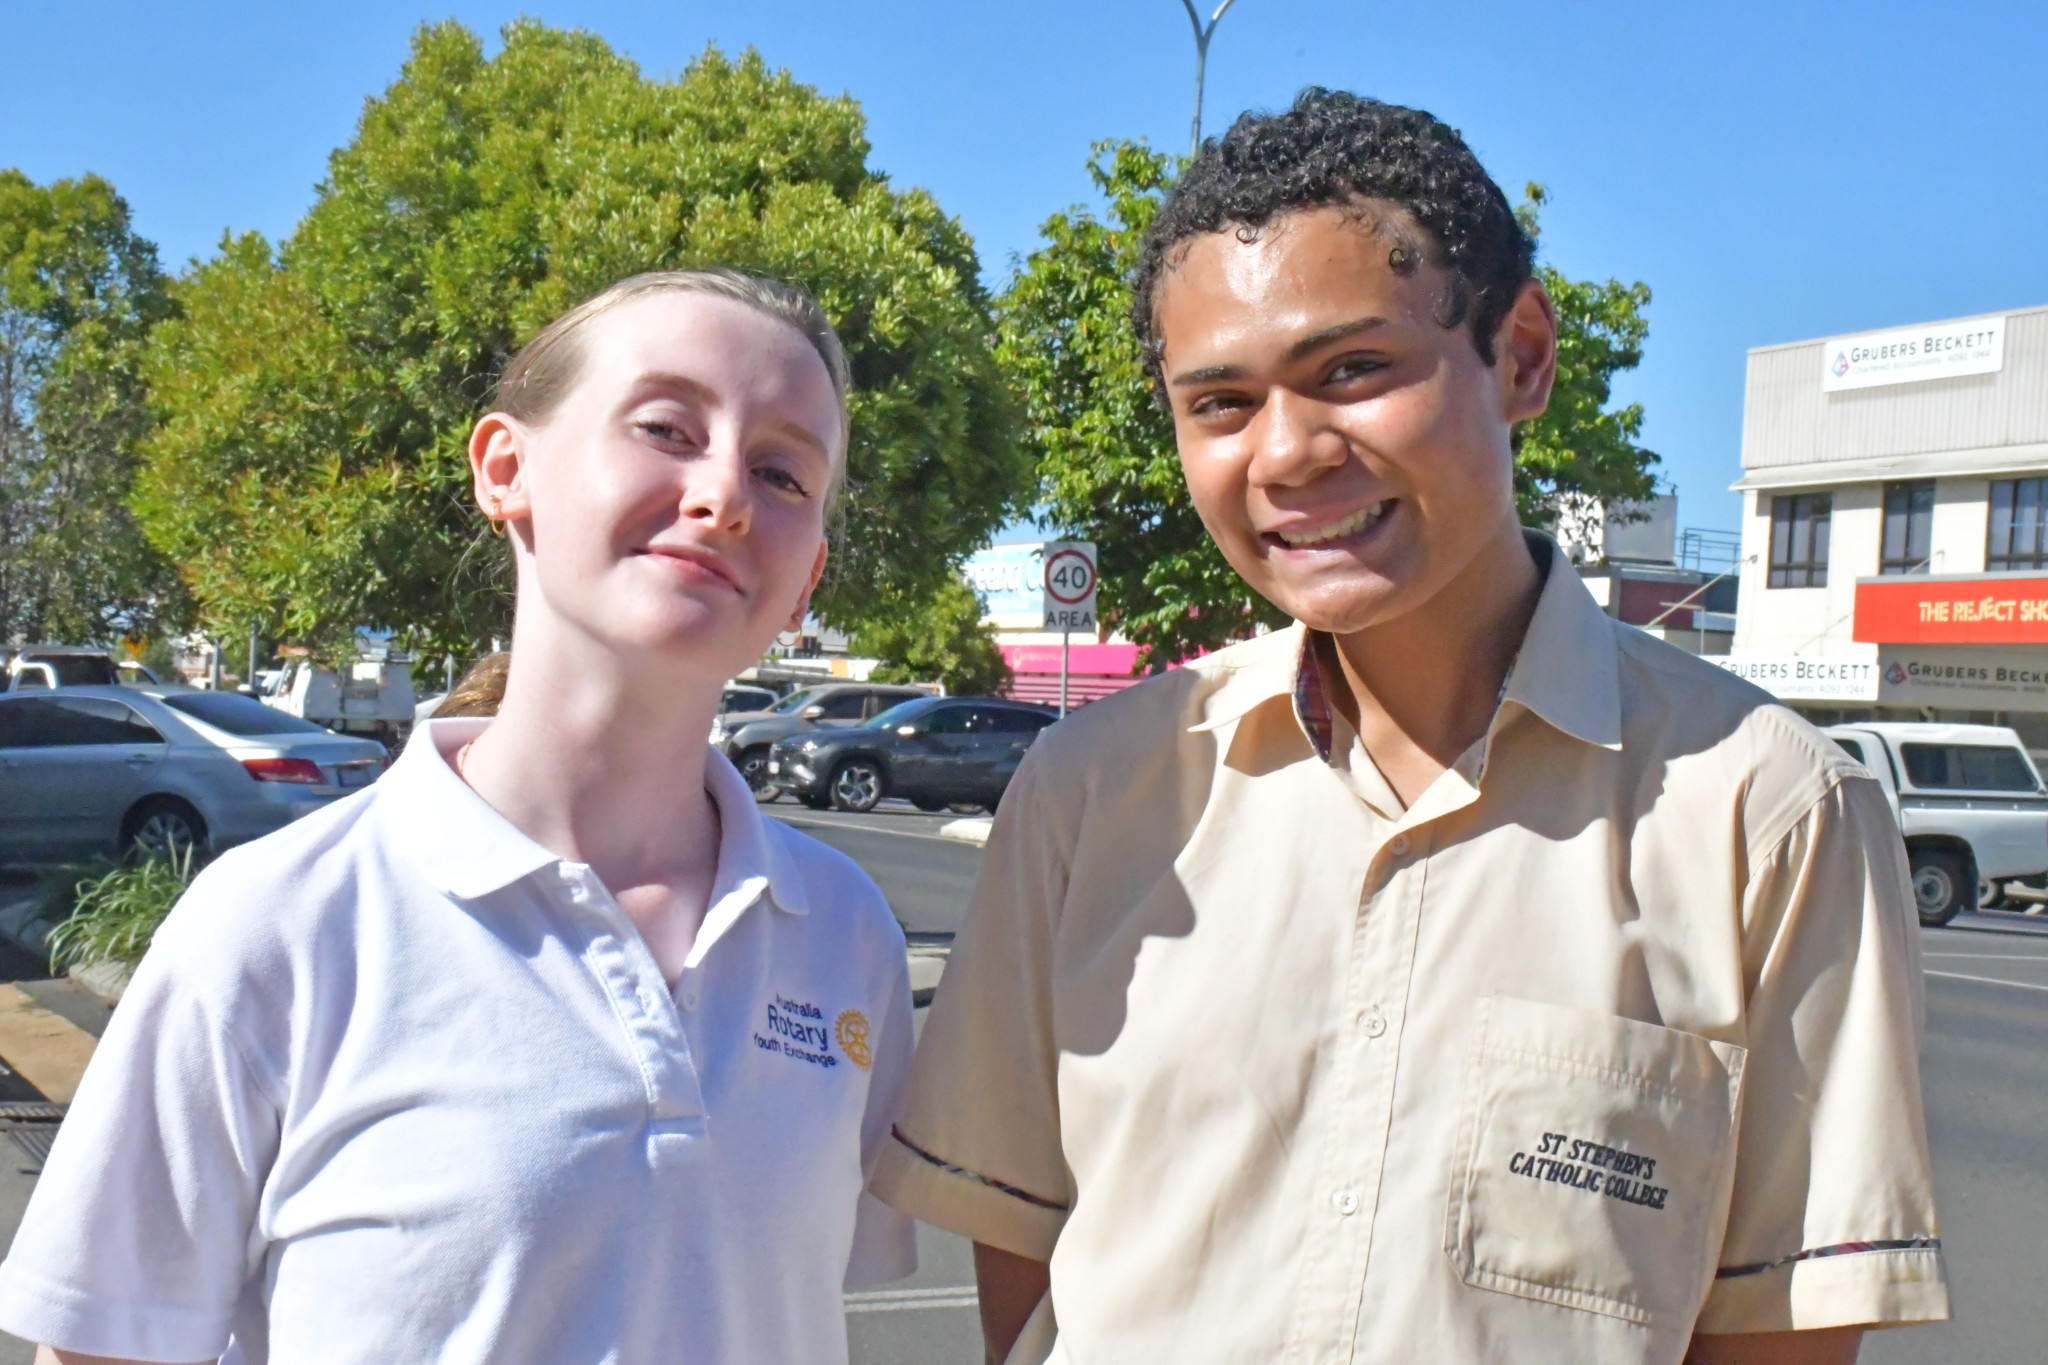 Juliet Radke and Rafael Lalabalavu will have the opportunity to live in another country through the Rotary Youth Exchange Program.